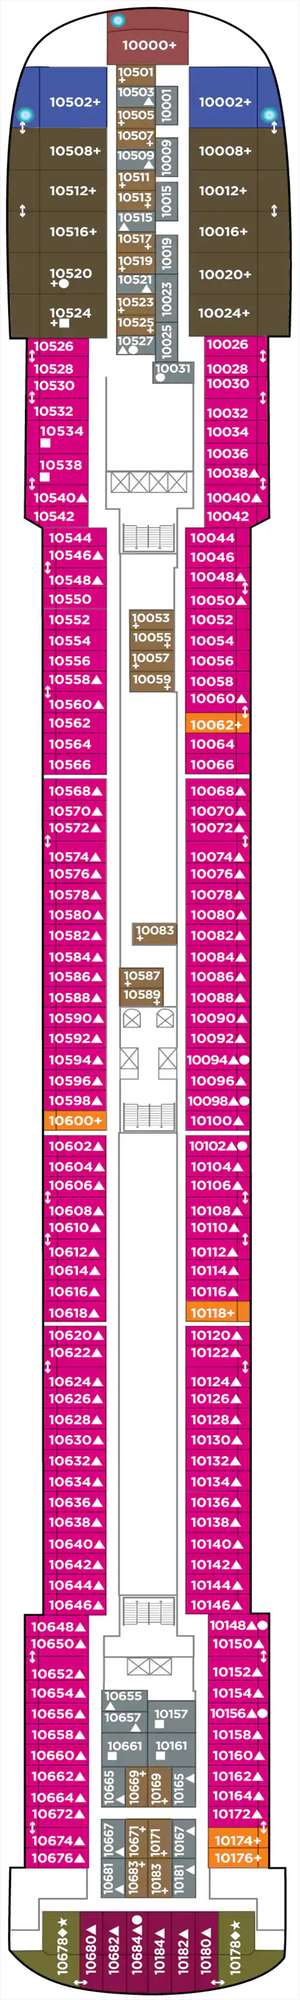 Deck plan for Pride of America